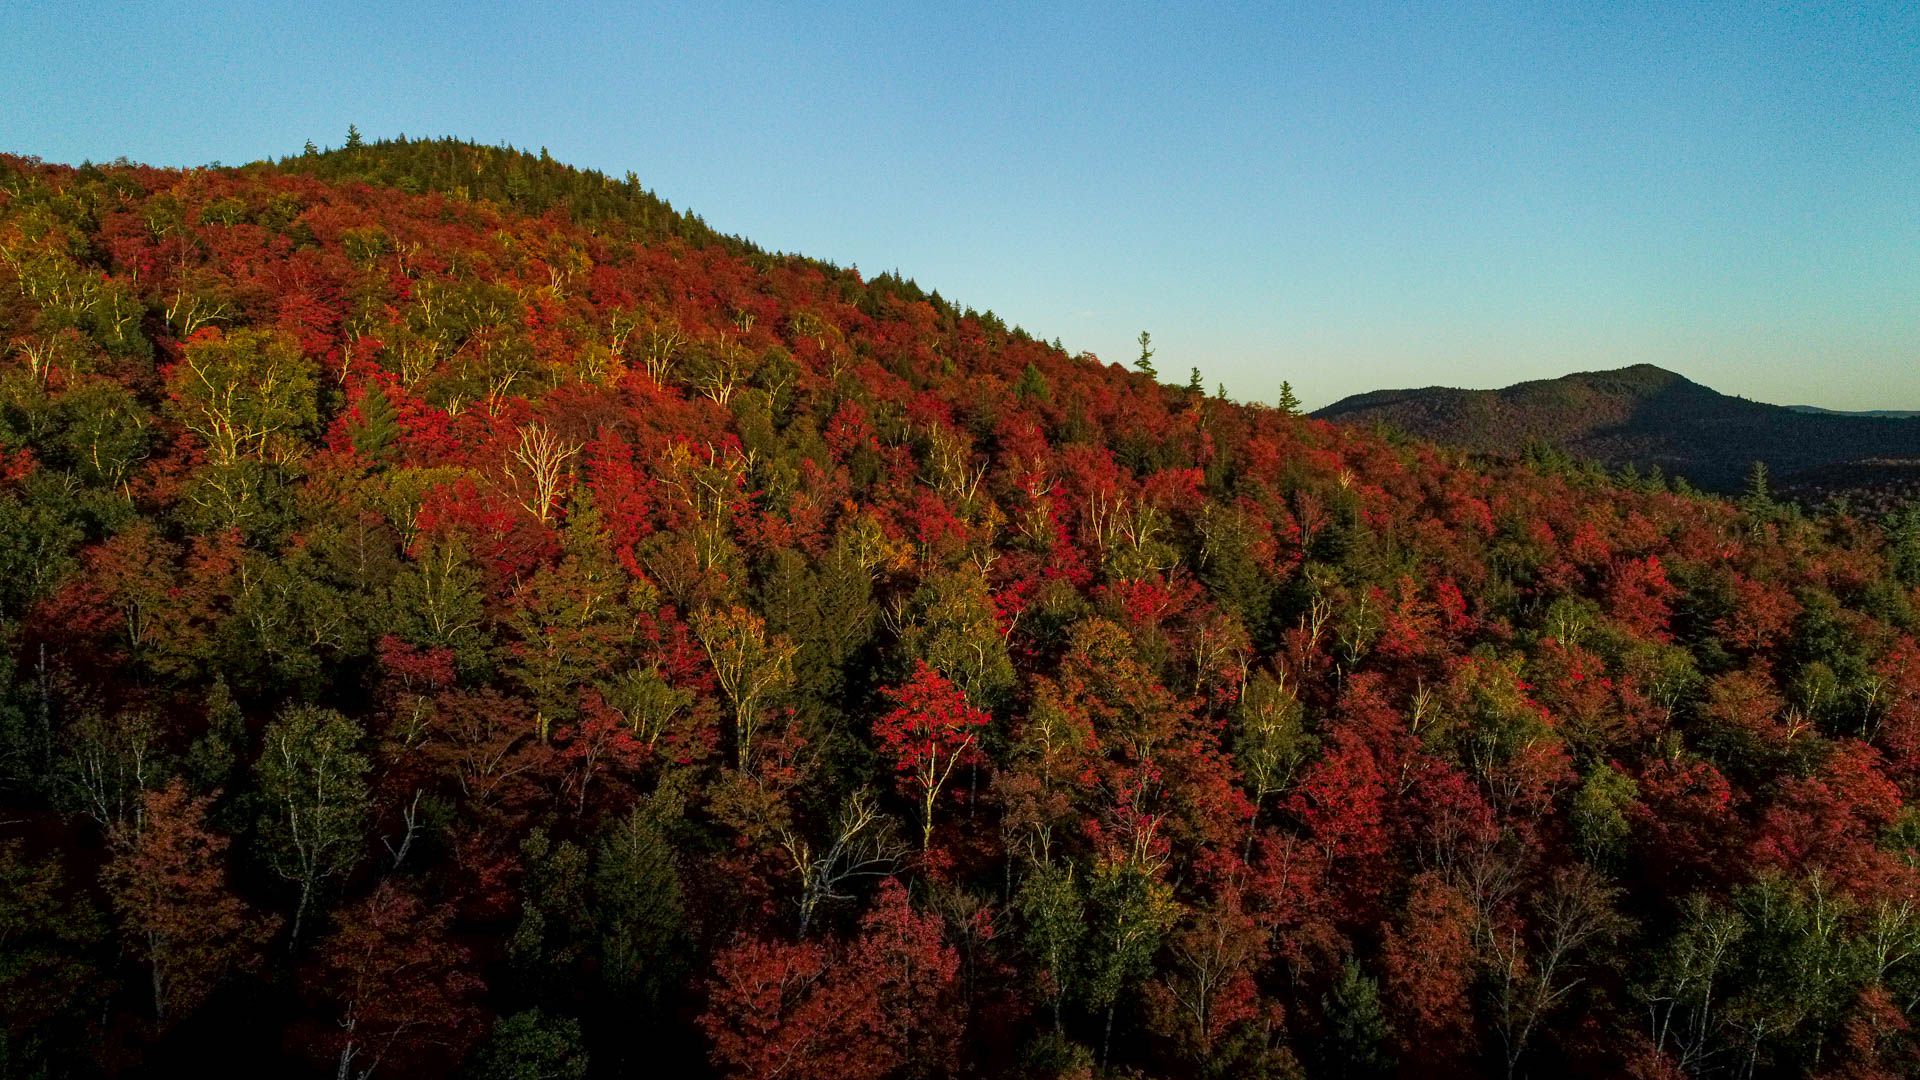 Fall colors peaking in much of Upstate NY this week